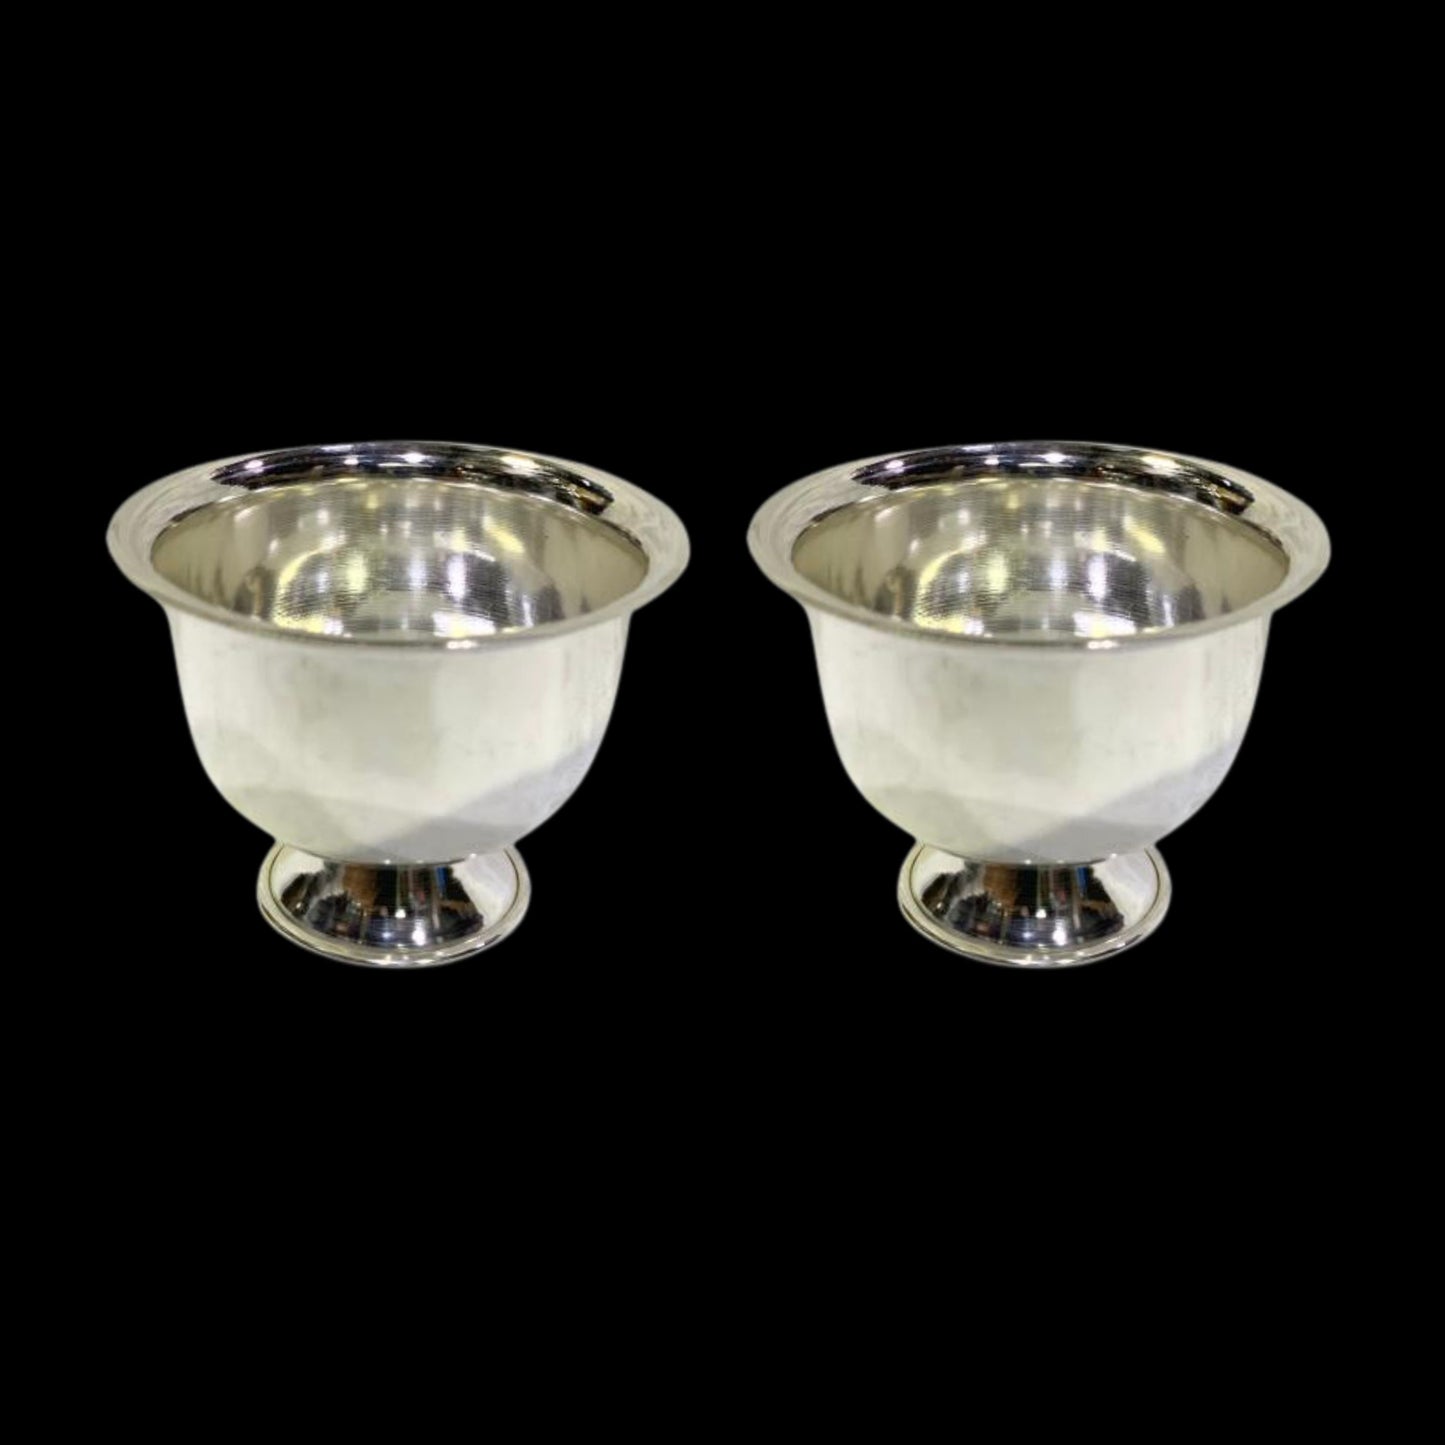 153 gms Pure Silver Padam Cups (Set Of 2) - Mirror Finished BIS Hallmarked